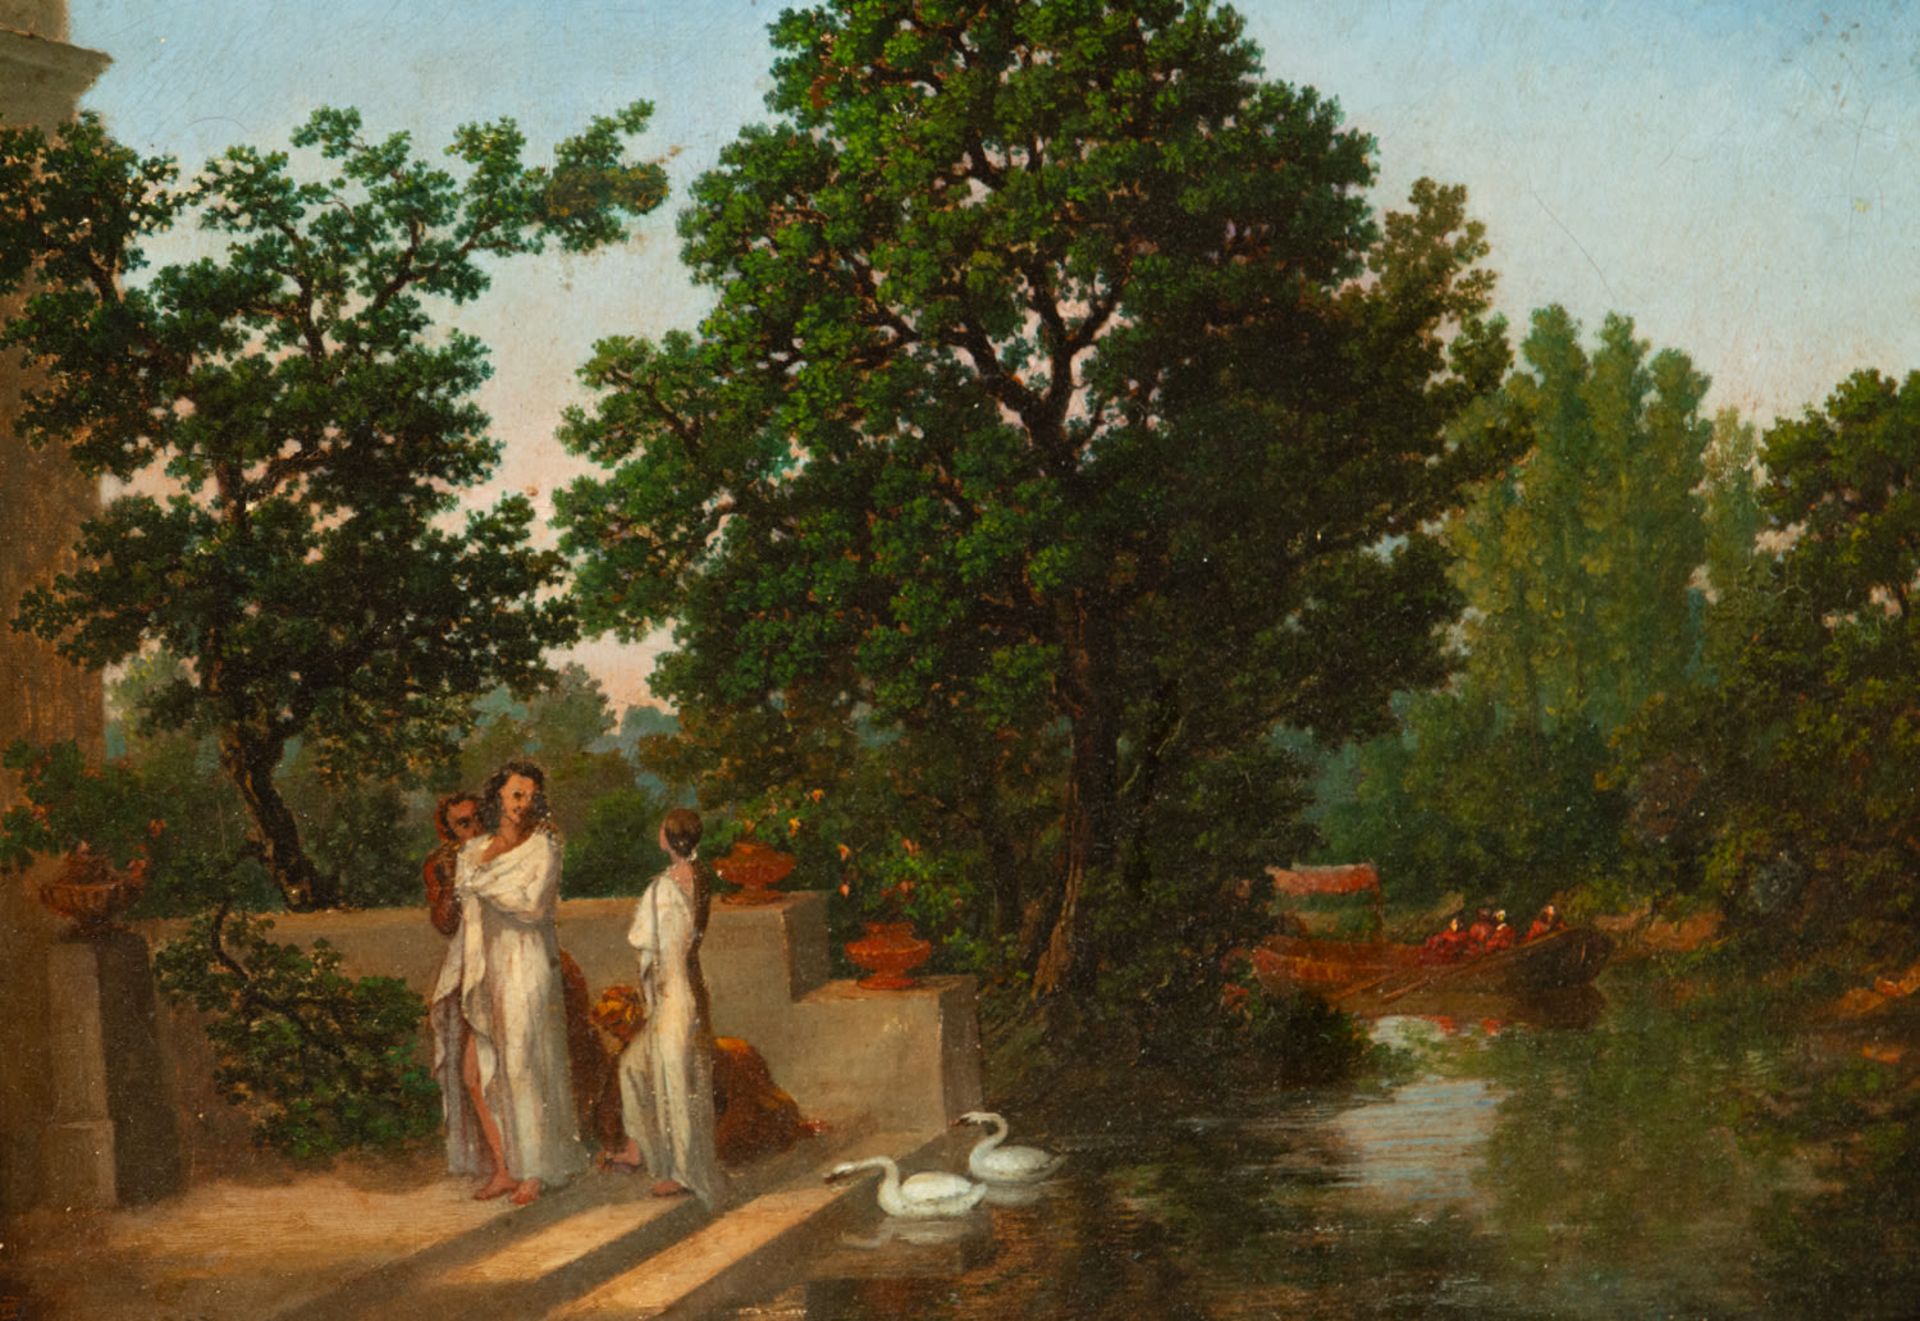 Augustin Toursel (1812 - 1853), signed, Landscape with women and swans, French school, 19th century - Image 2 of 6